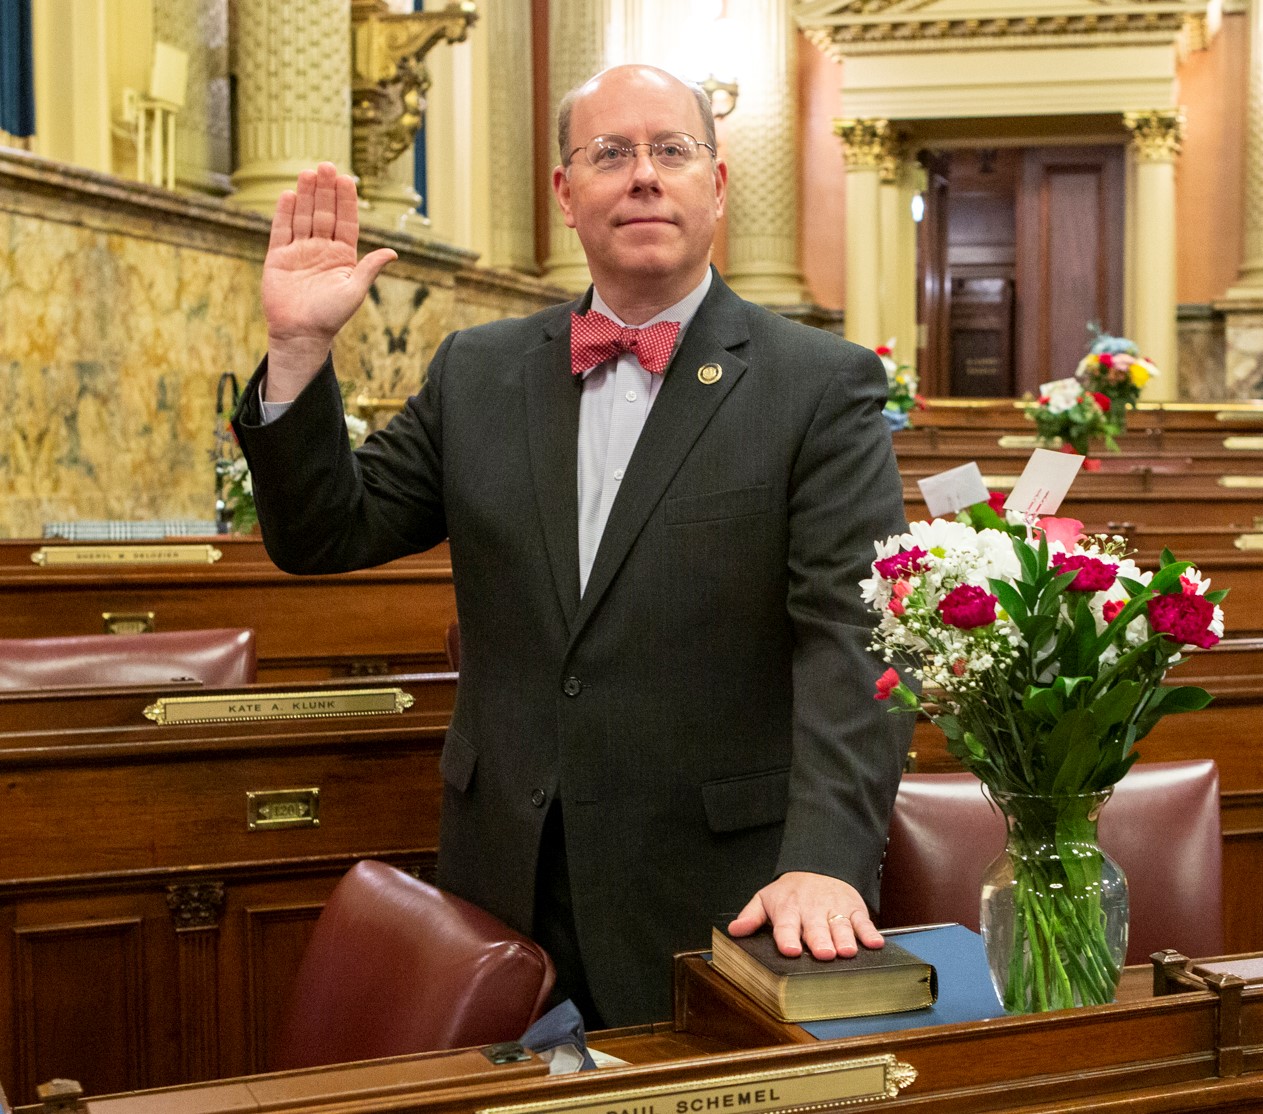 Schemel Takes Oath of Office for Fourth Term 